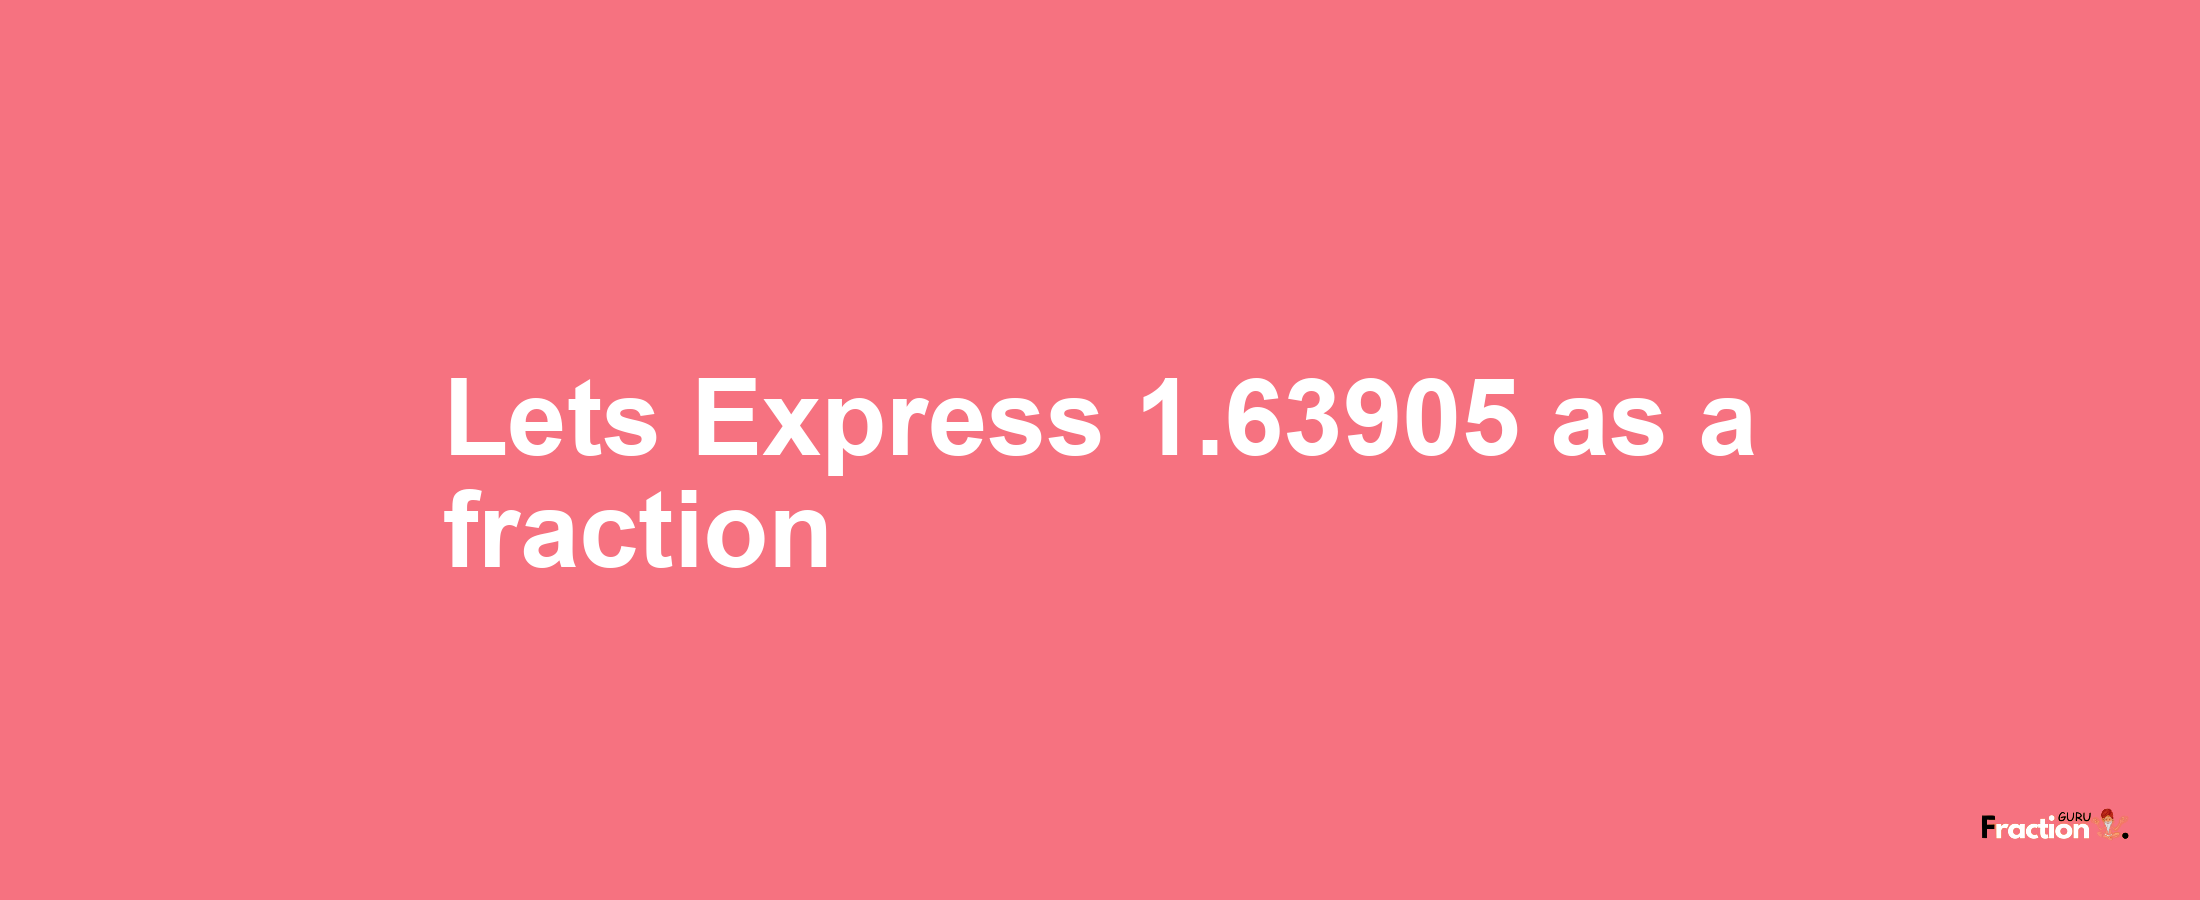 Lets Express 1.63905 as afraction